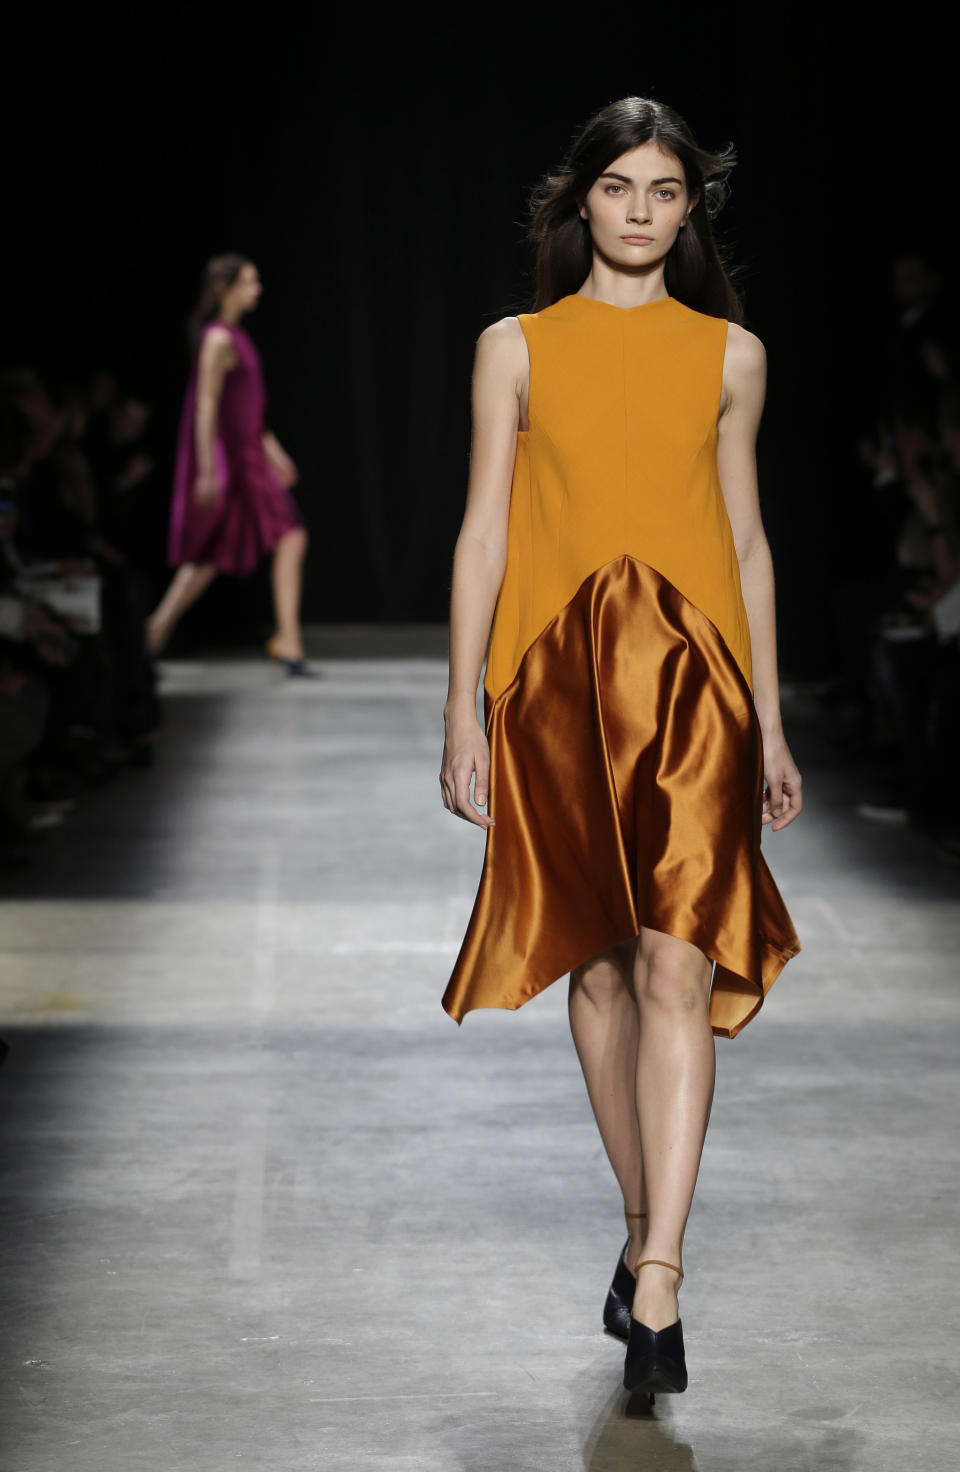 The Narciso Rodriguez Fall 2013 collection is modeled during Fashion Week in New York, Tuesday, Feb. 12, 2013. (AP Photo/Seth Wenig)